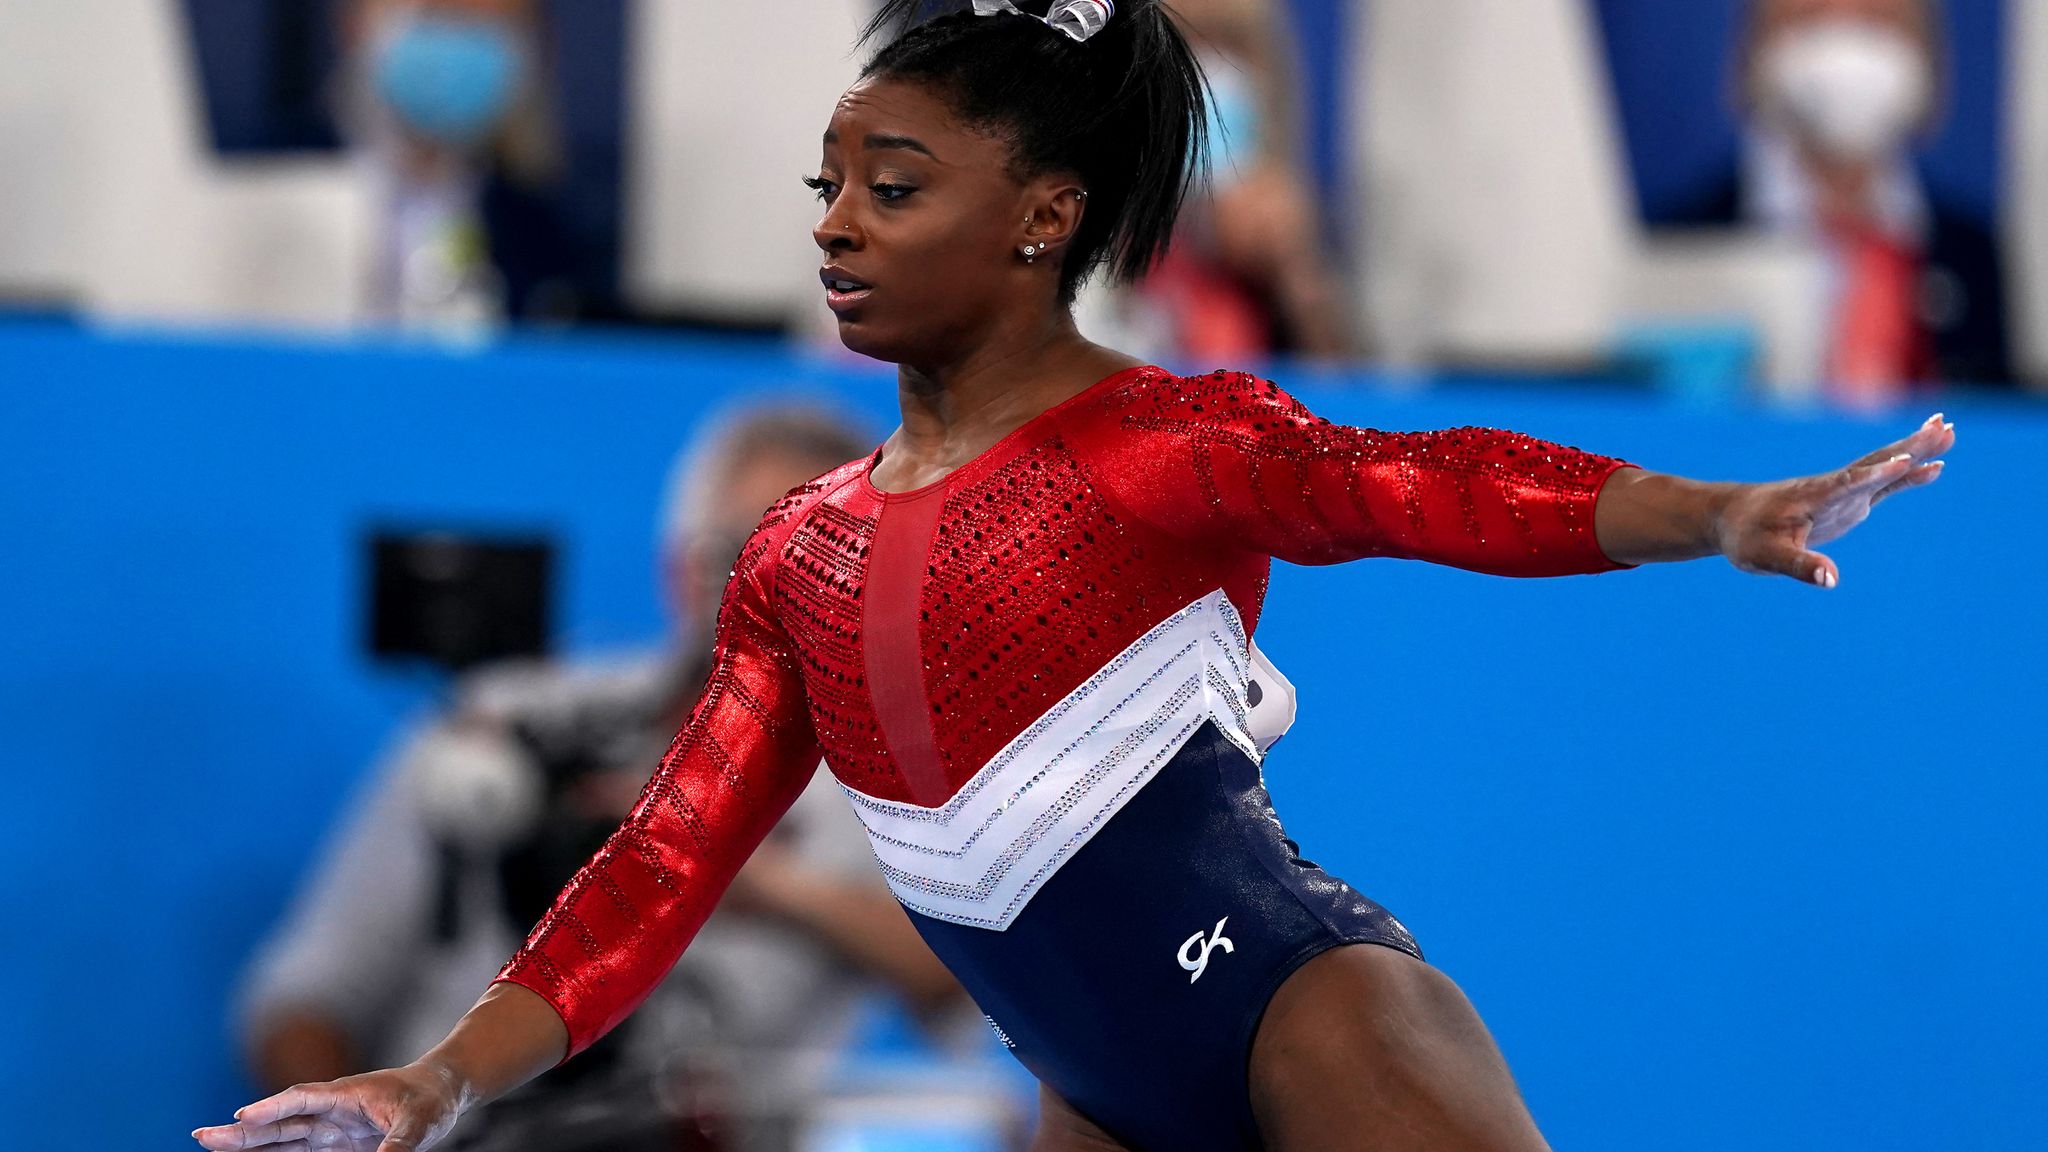 Simone Biles withdraws from individual all-around event 'to focus